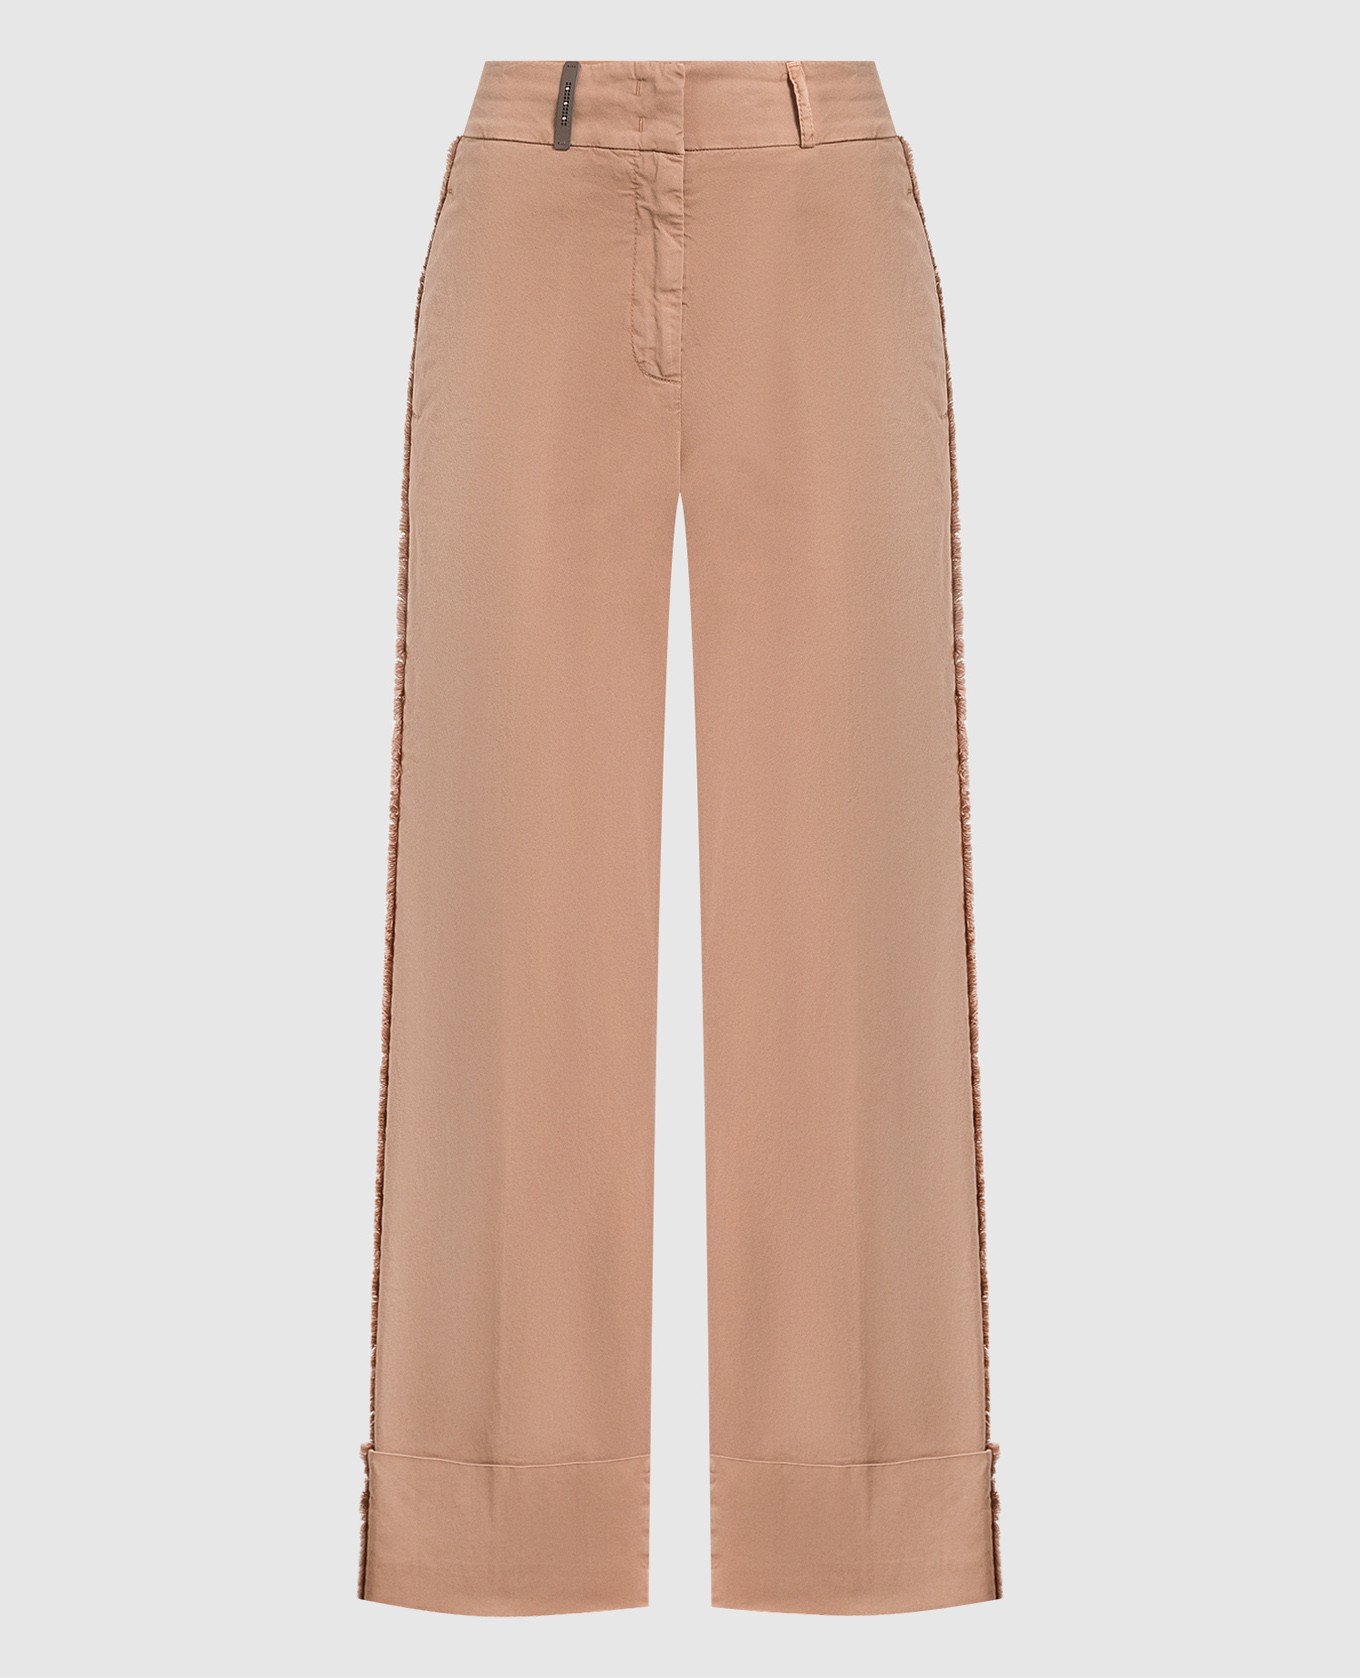 Brown trousers with cuffs